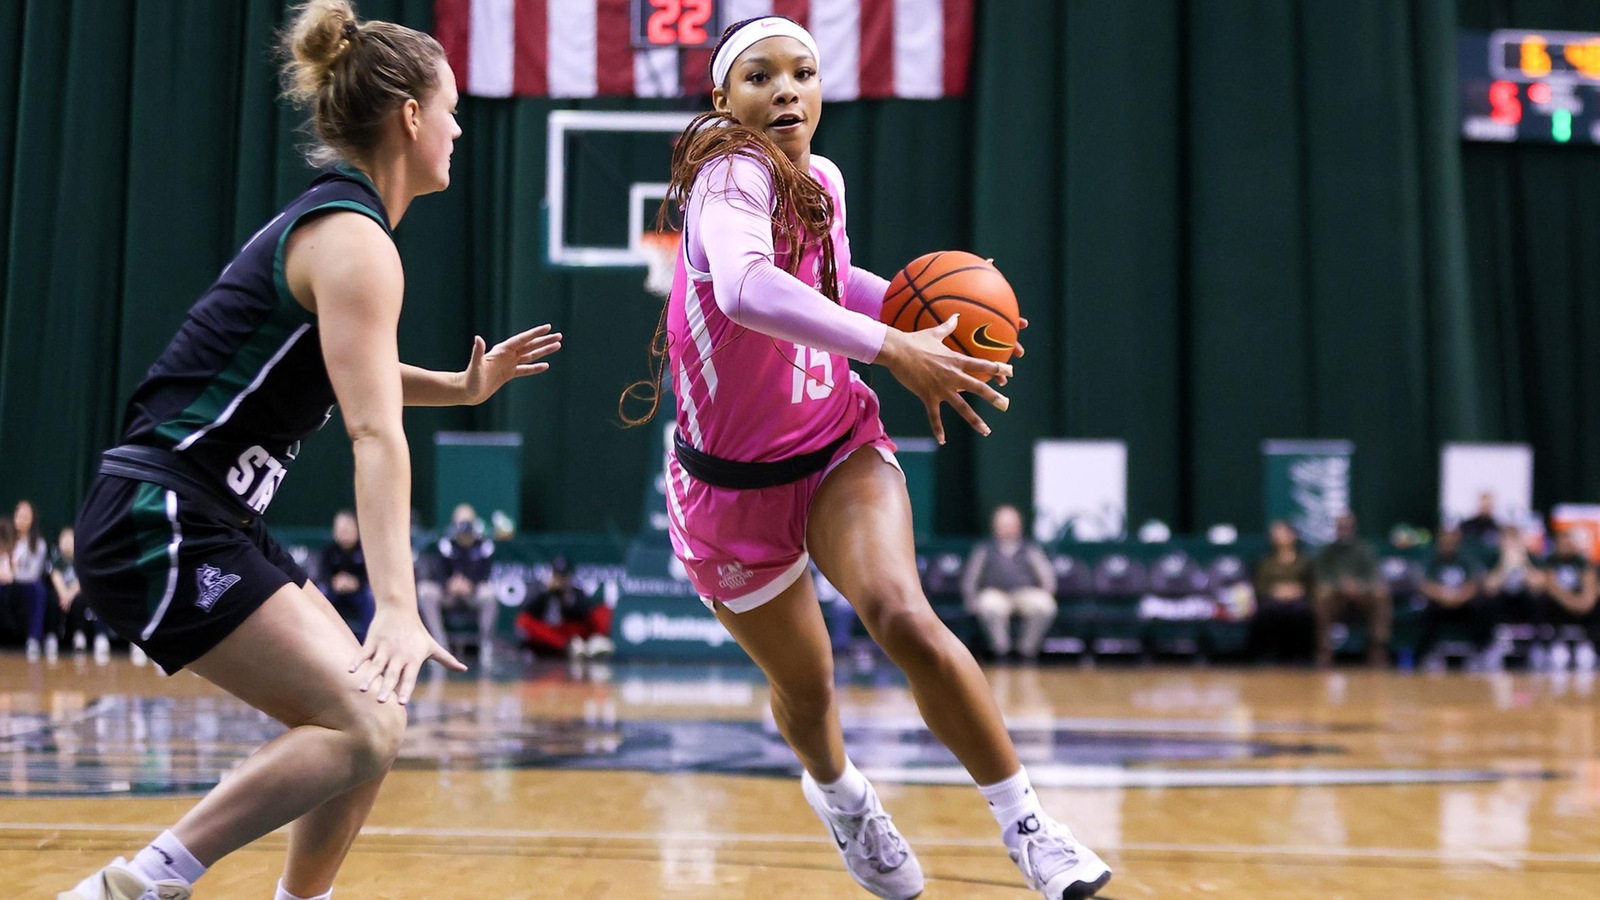 Cleveland State Women's Basketball Earns 87-49 Victory Over Wright State On Senior Day